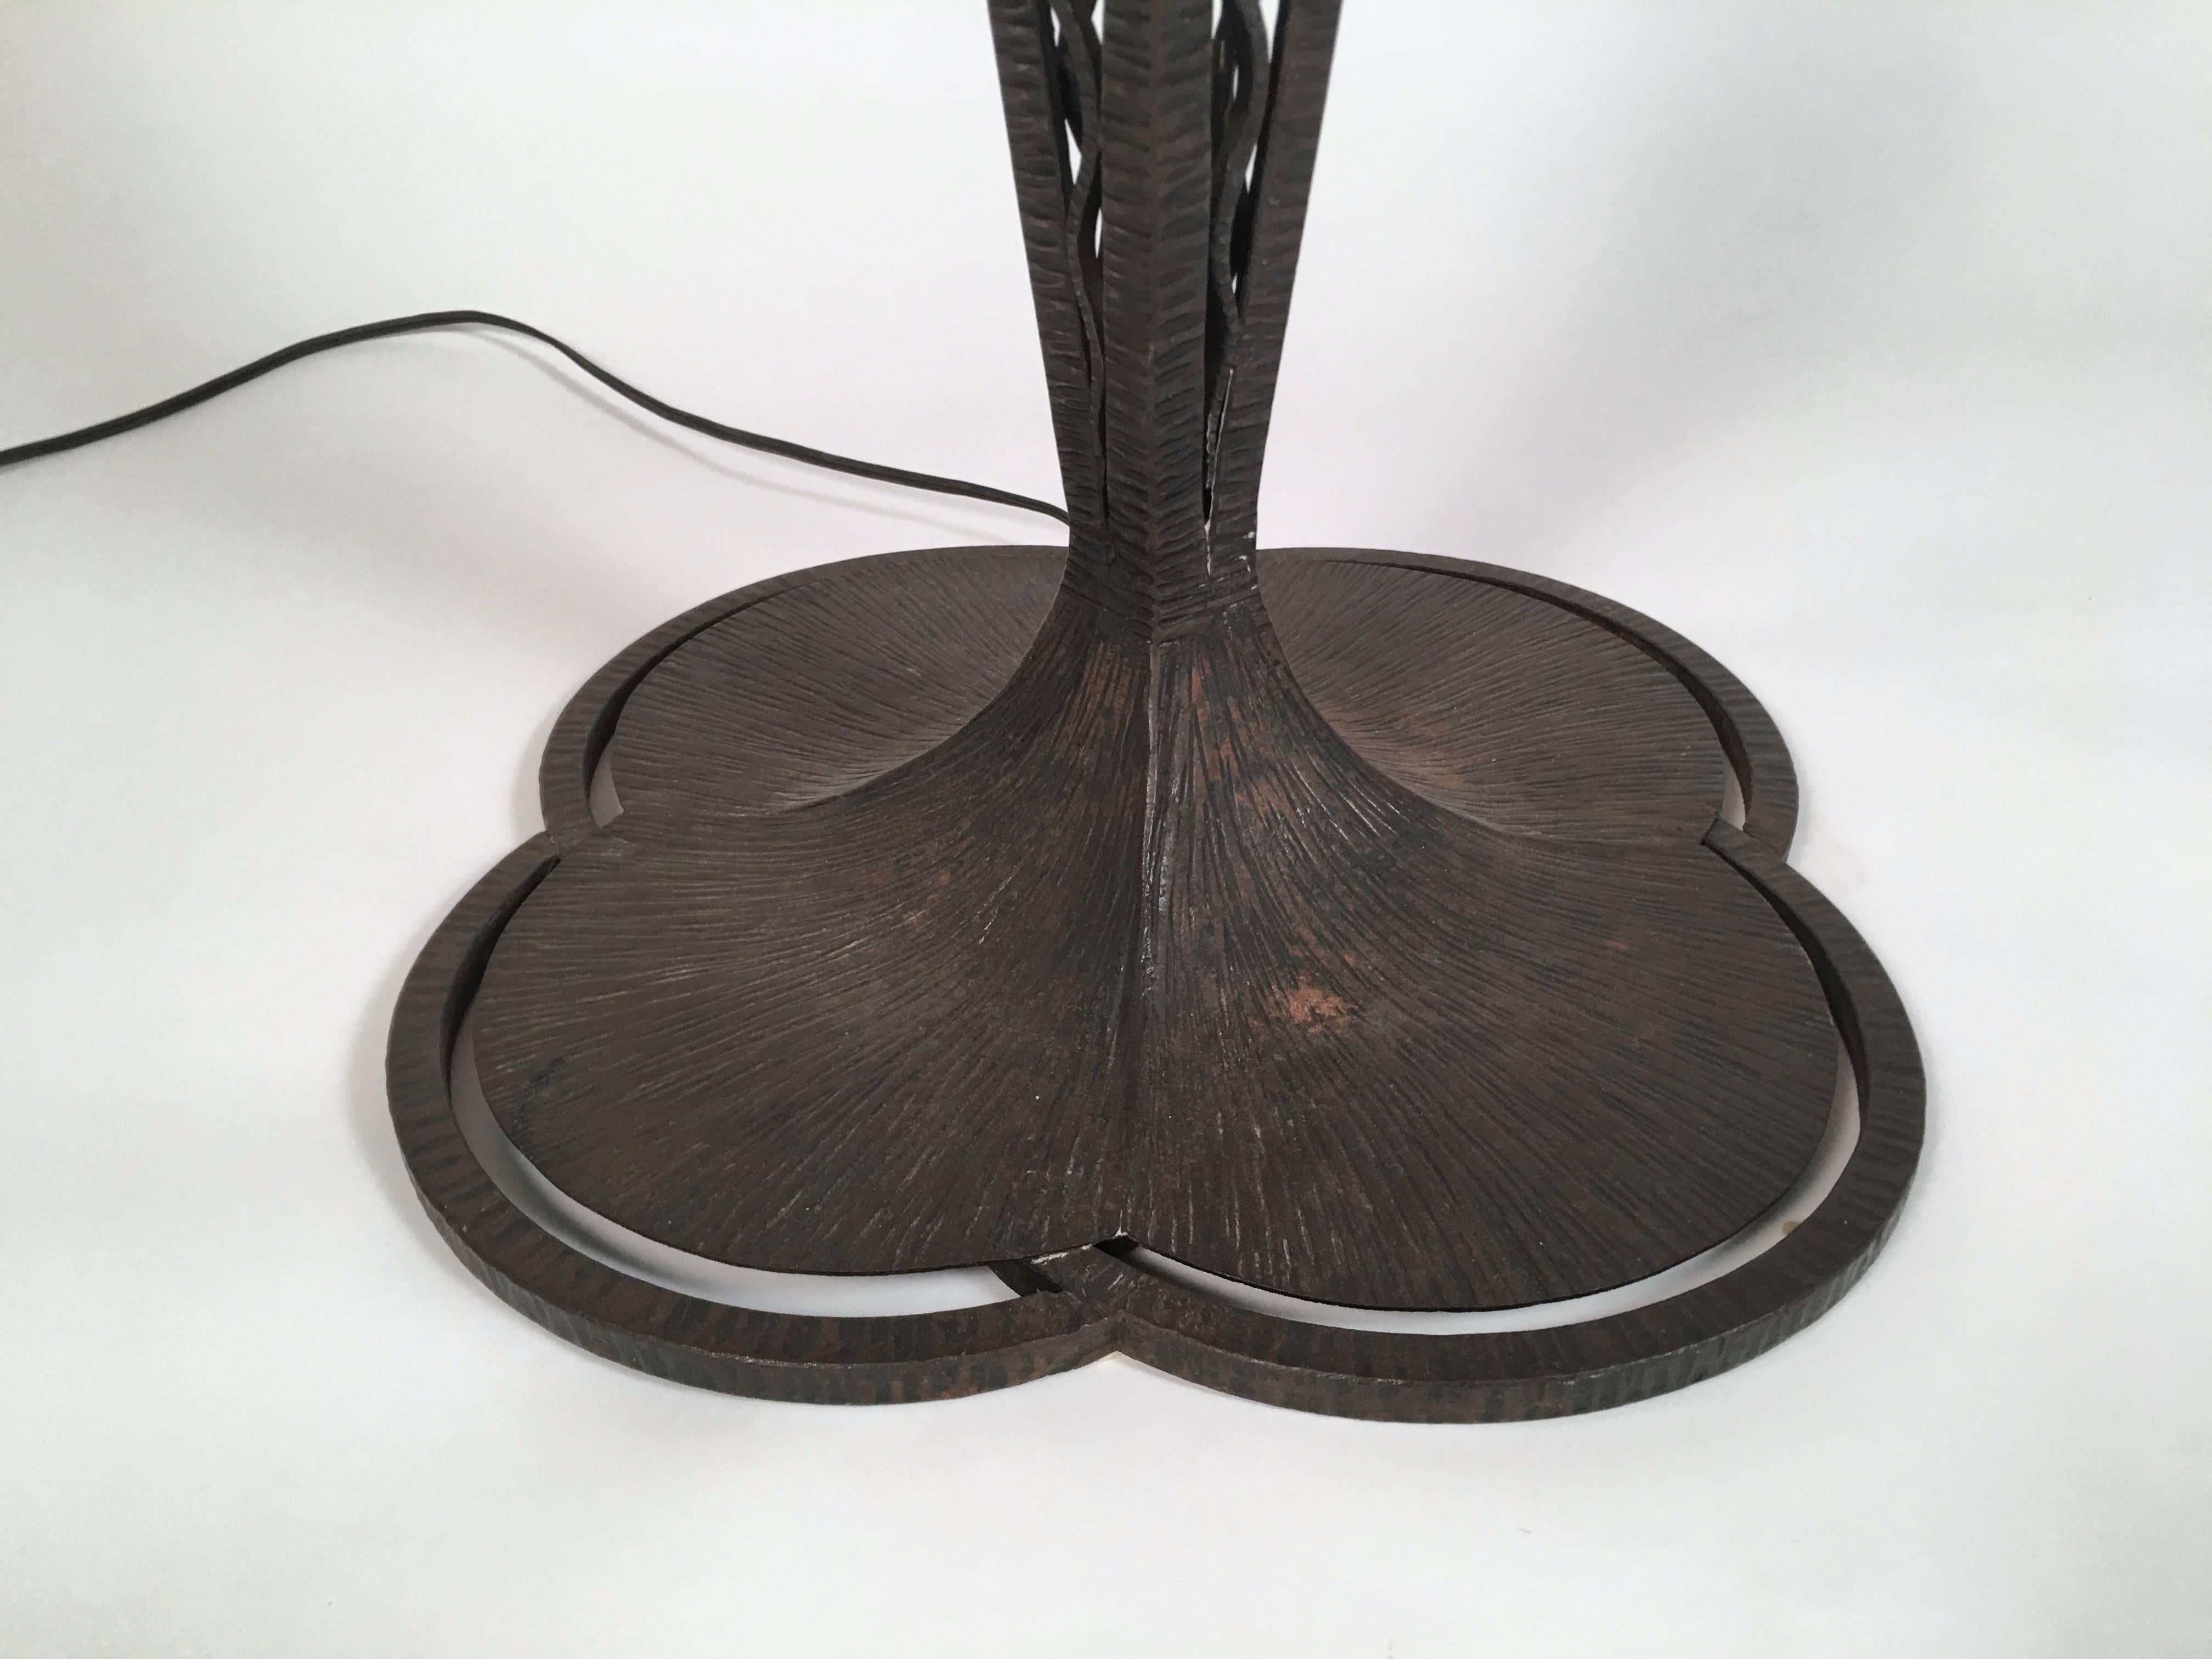 Early 20th Century French Art Deco Lamp with Daum Art Glass Shade and Wrought Iron Base